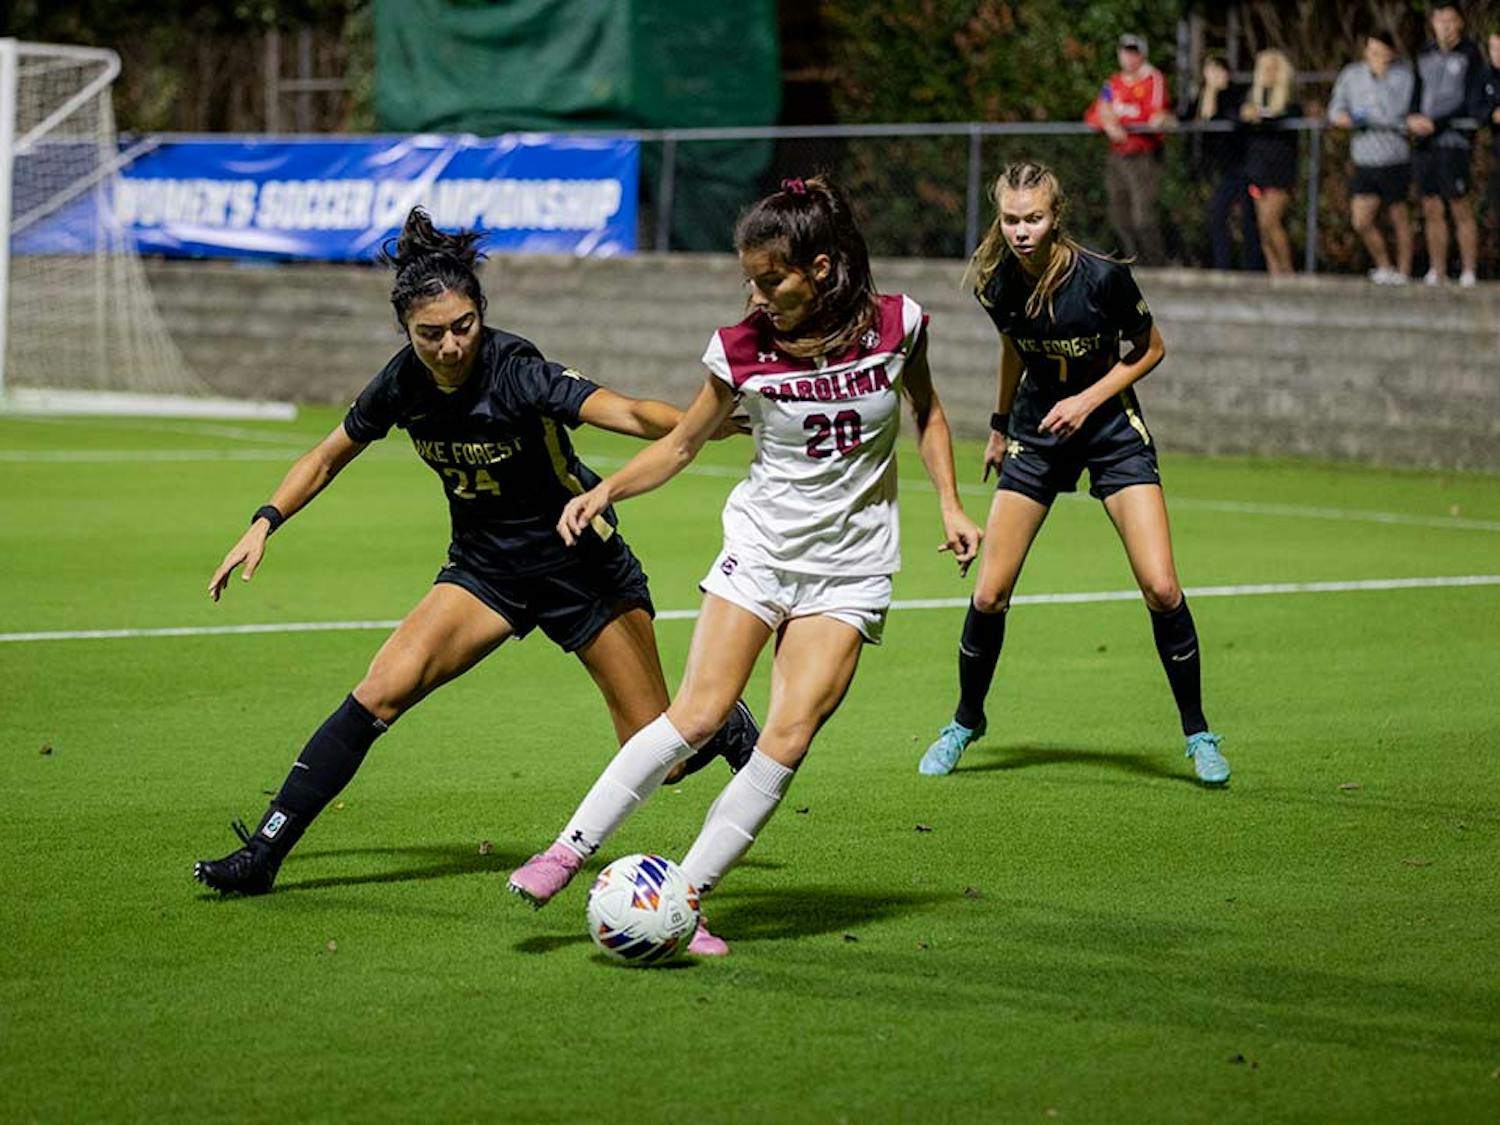 Junior forward Corinna Zullo fights for control of the ball during South Carolina's 2-0 win over Wake Forest. Zullo attempted one shot during the game at Stone Stadium on Nov. 12, 2022.